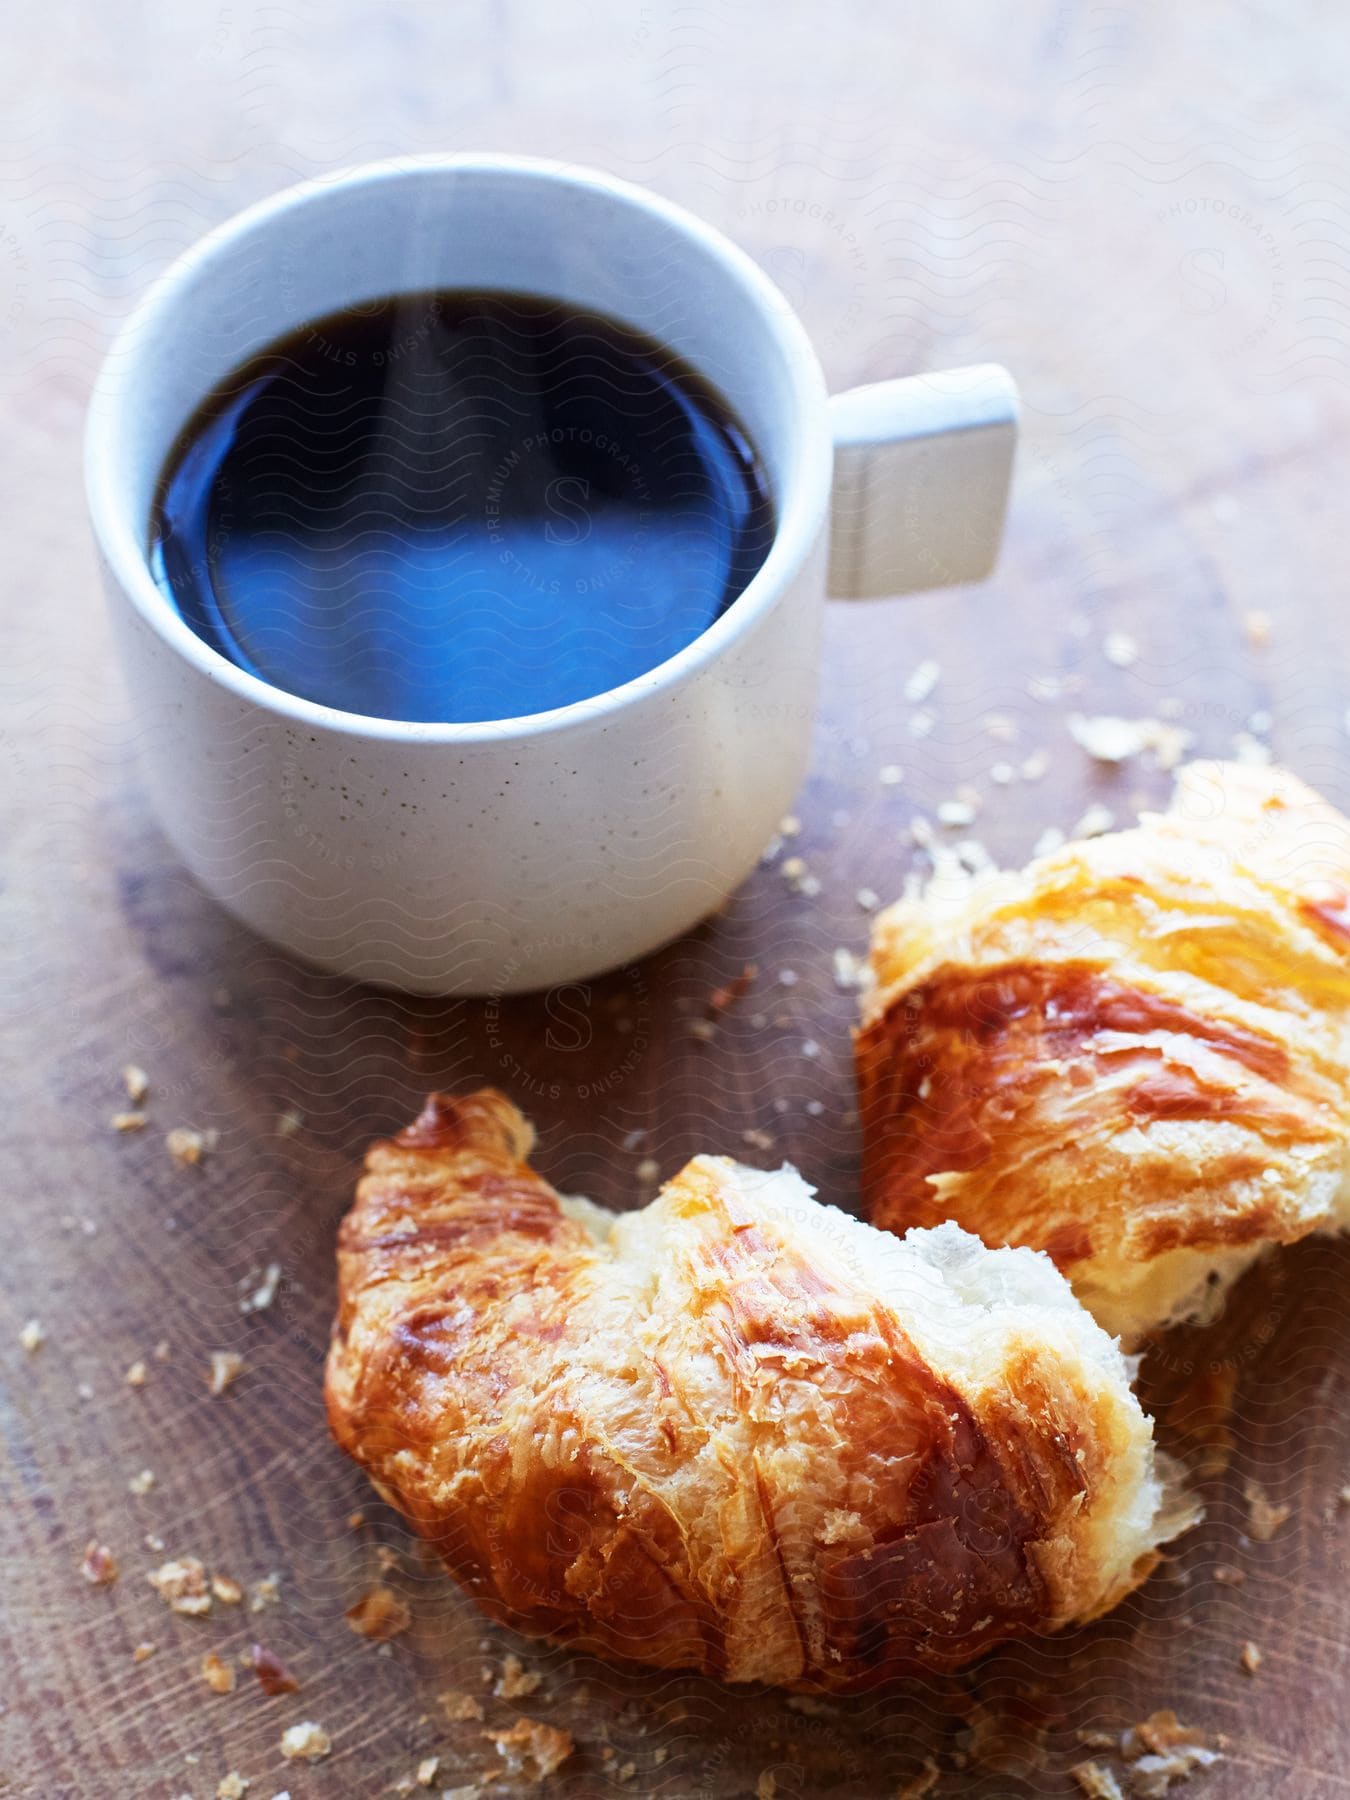 A simple breakfast of two croissants and a cup of coffee sits on a wooden table.